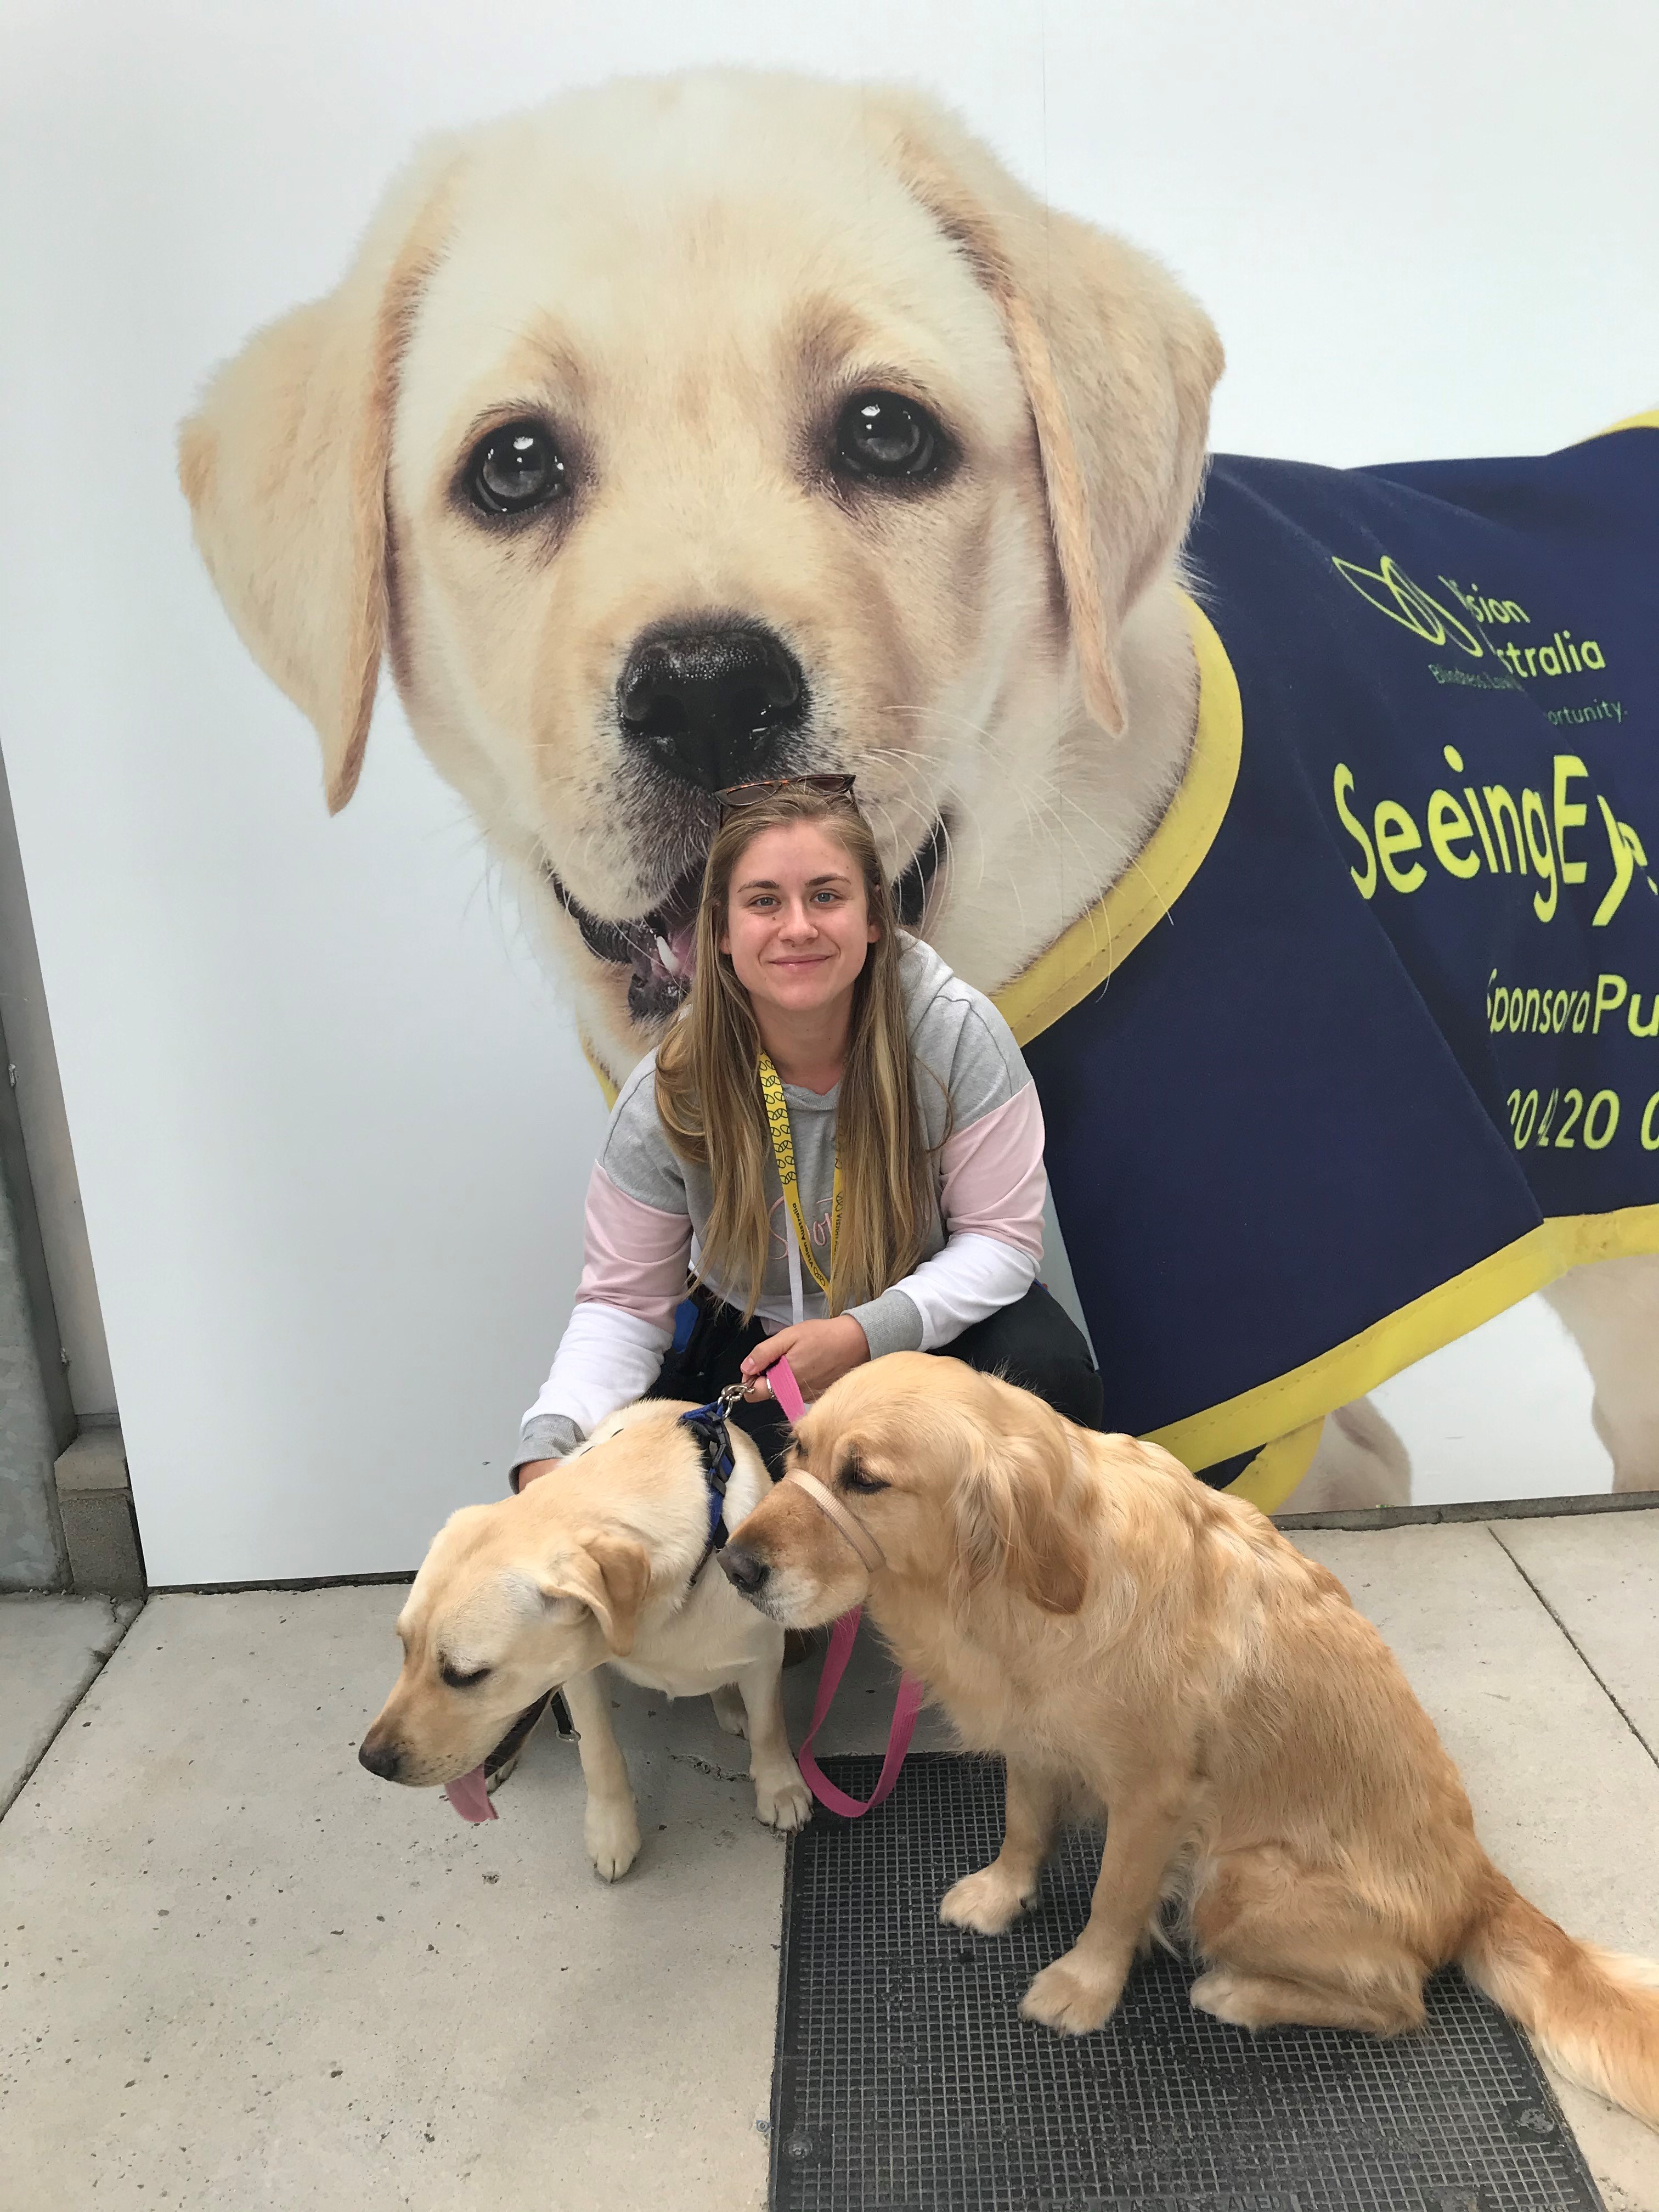 Emilia crouches next to two Seeing Eye Dogs in training